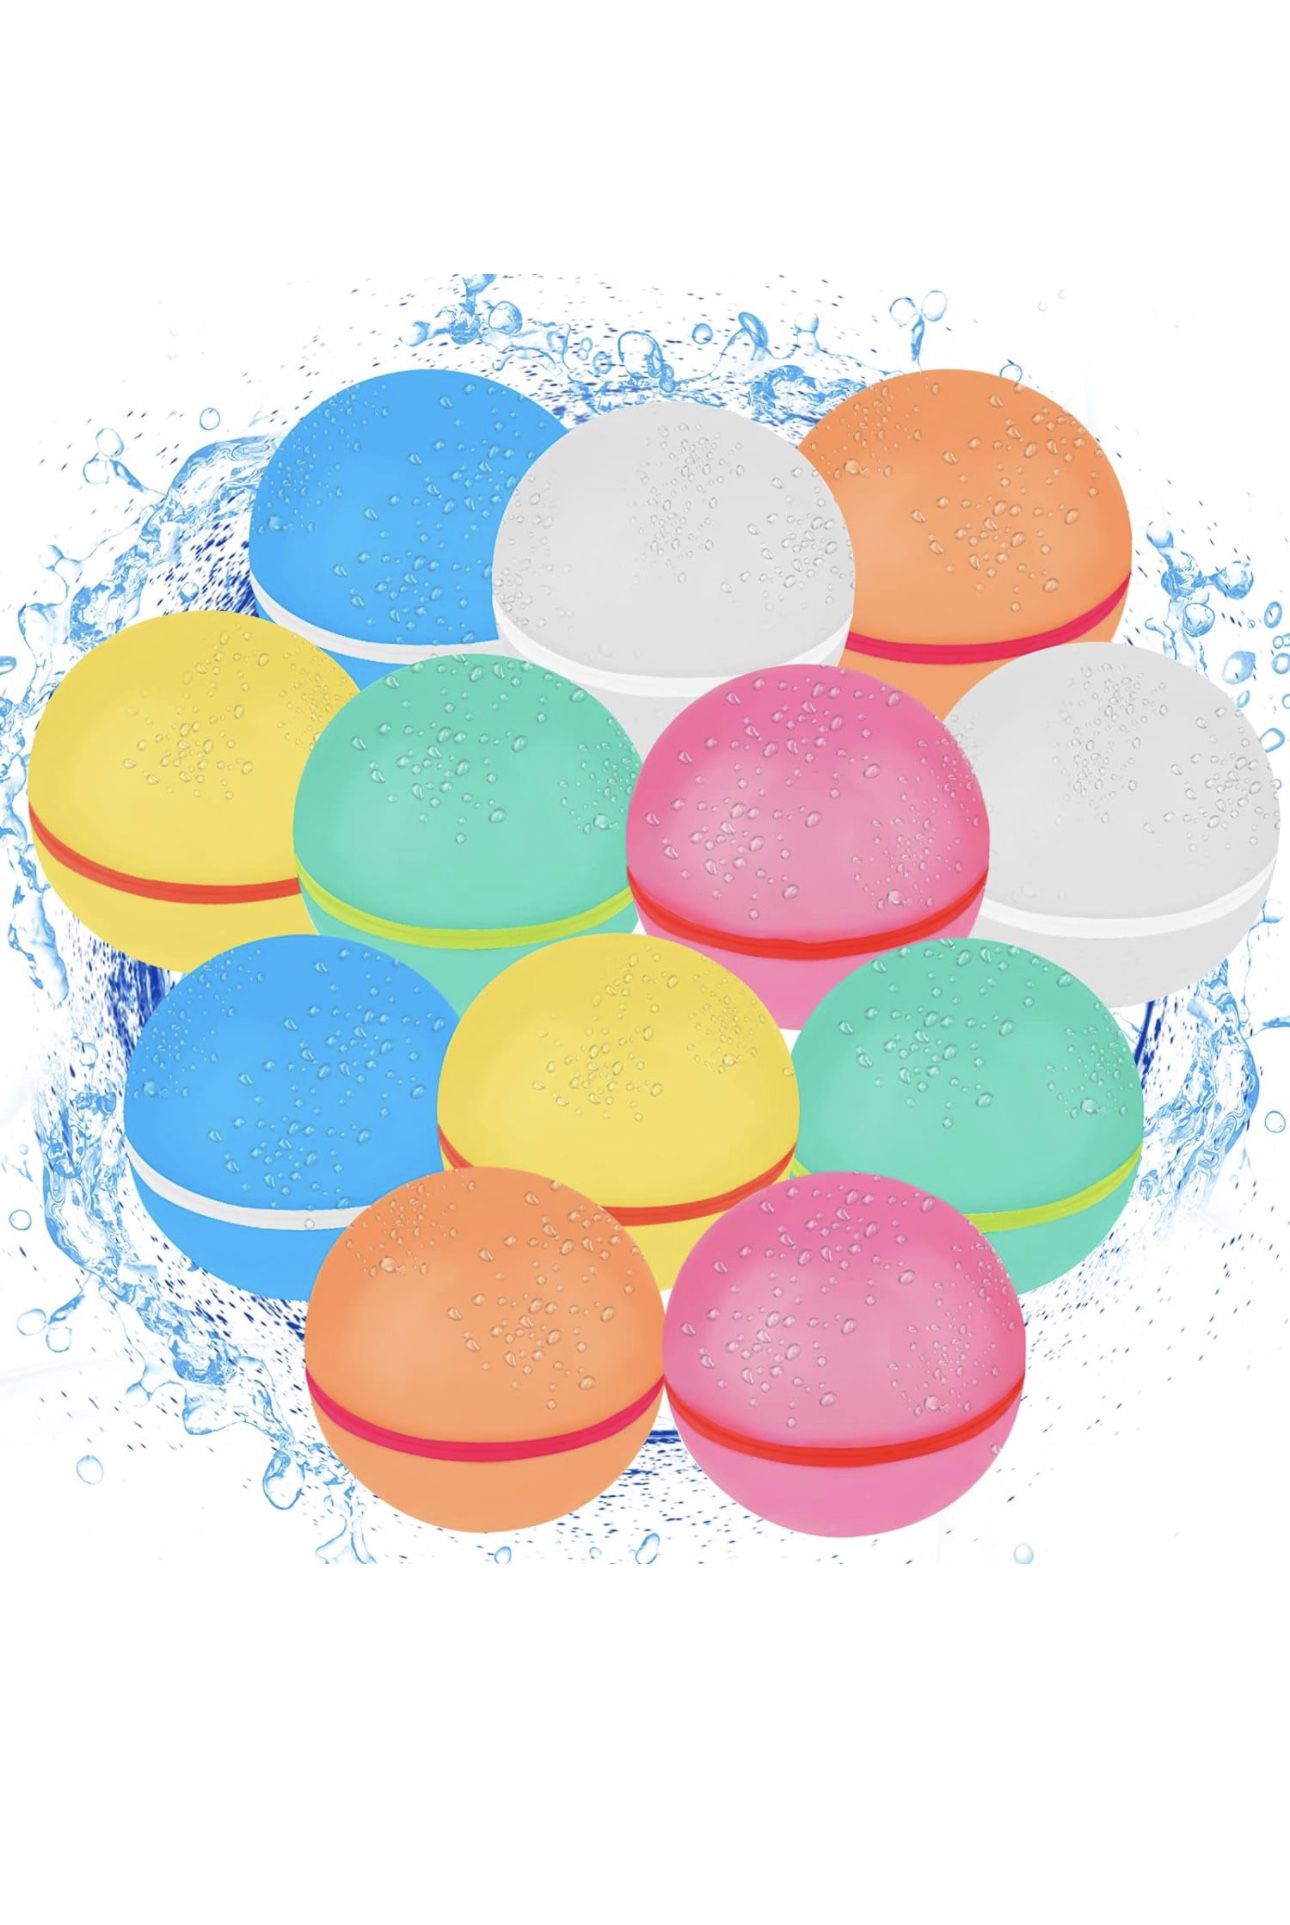 BRAND NEW 12PCS Reusable Magnetic Silicone Self-Sealing Quick Fill Water Balloons For Kids